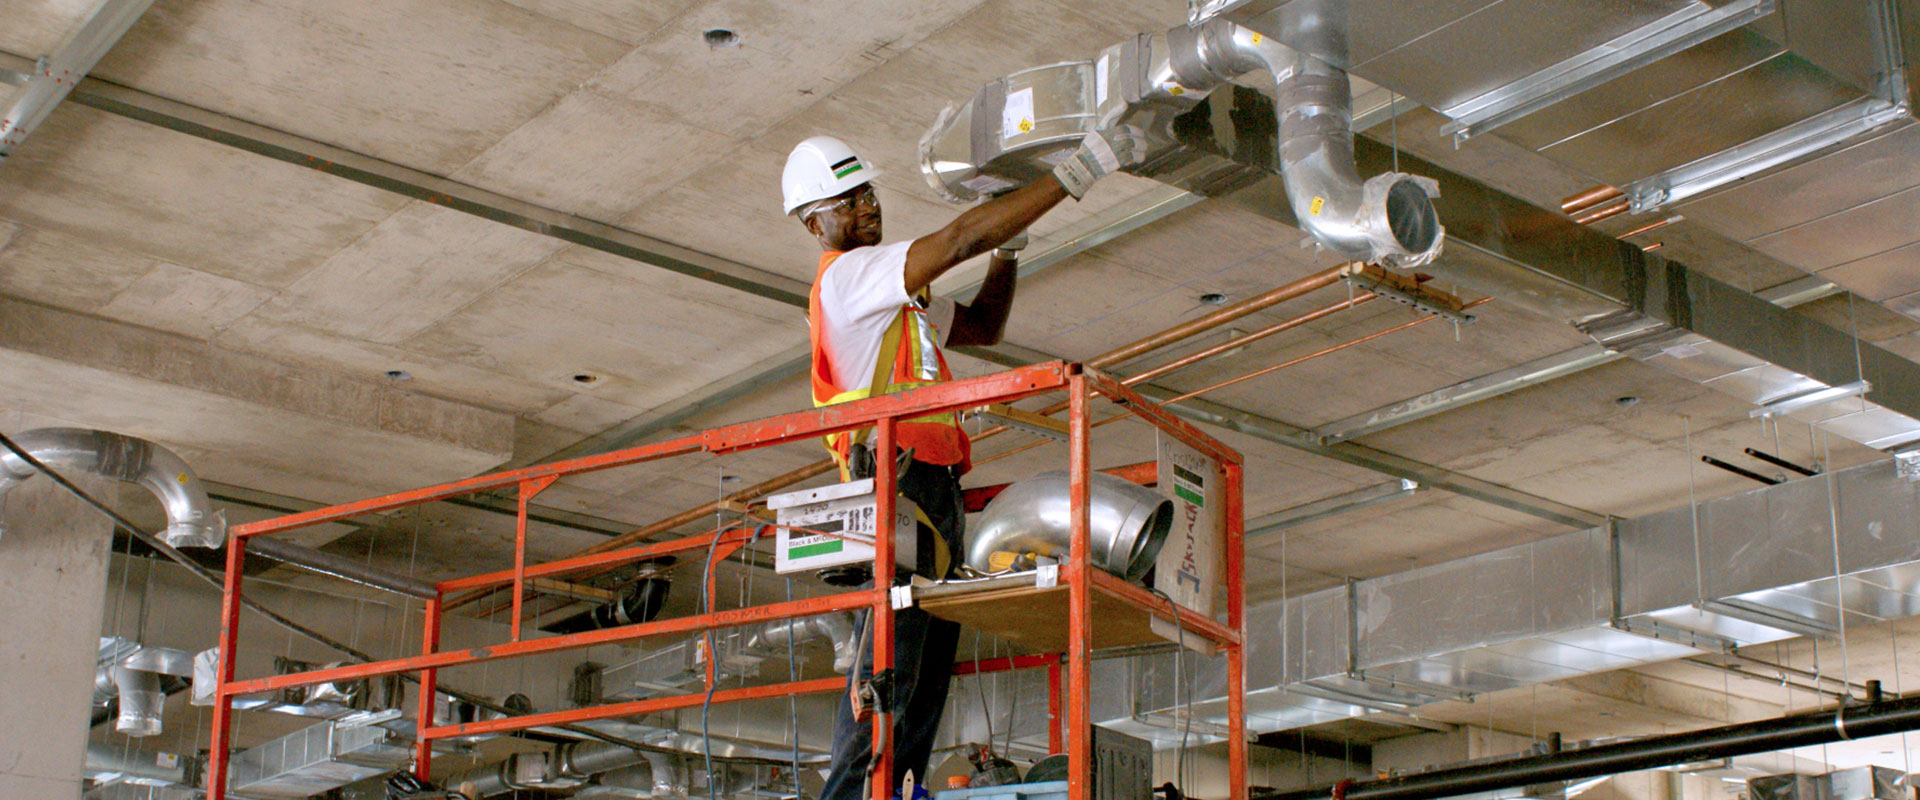 B&M tradesperson on an elevated platform installing sheet metal for a ducting project